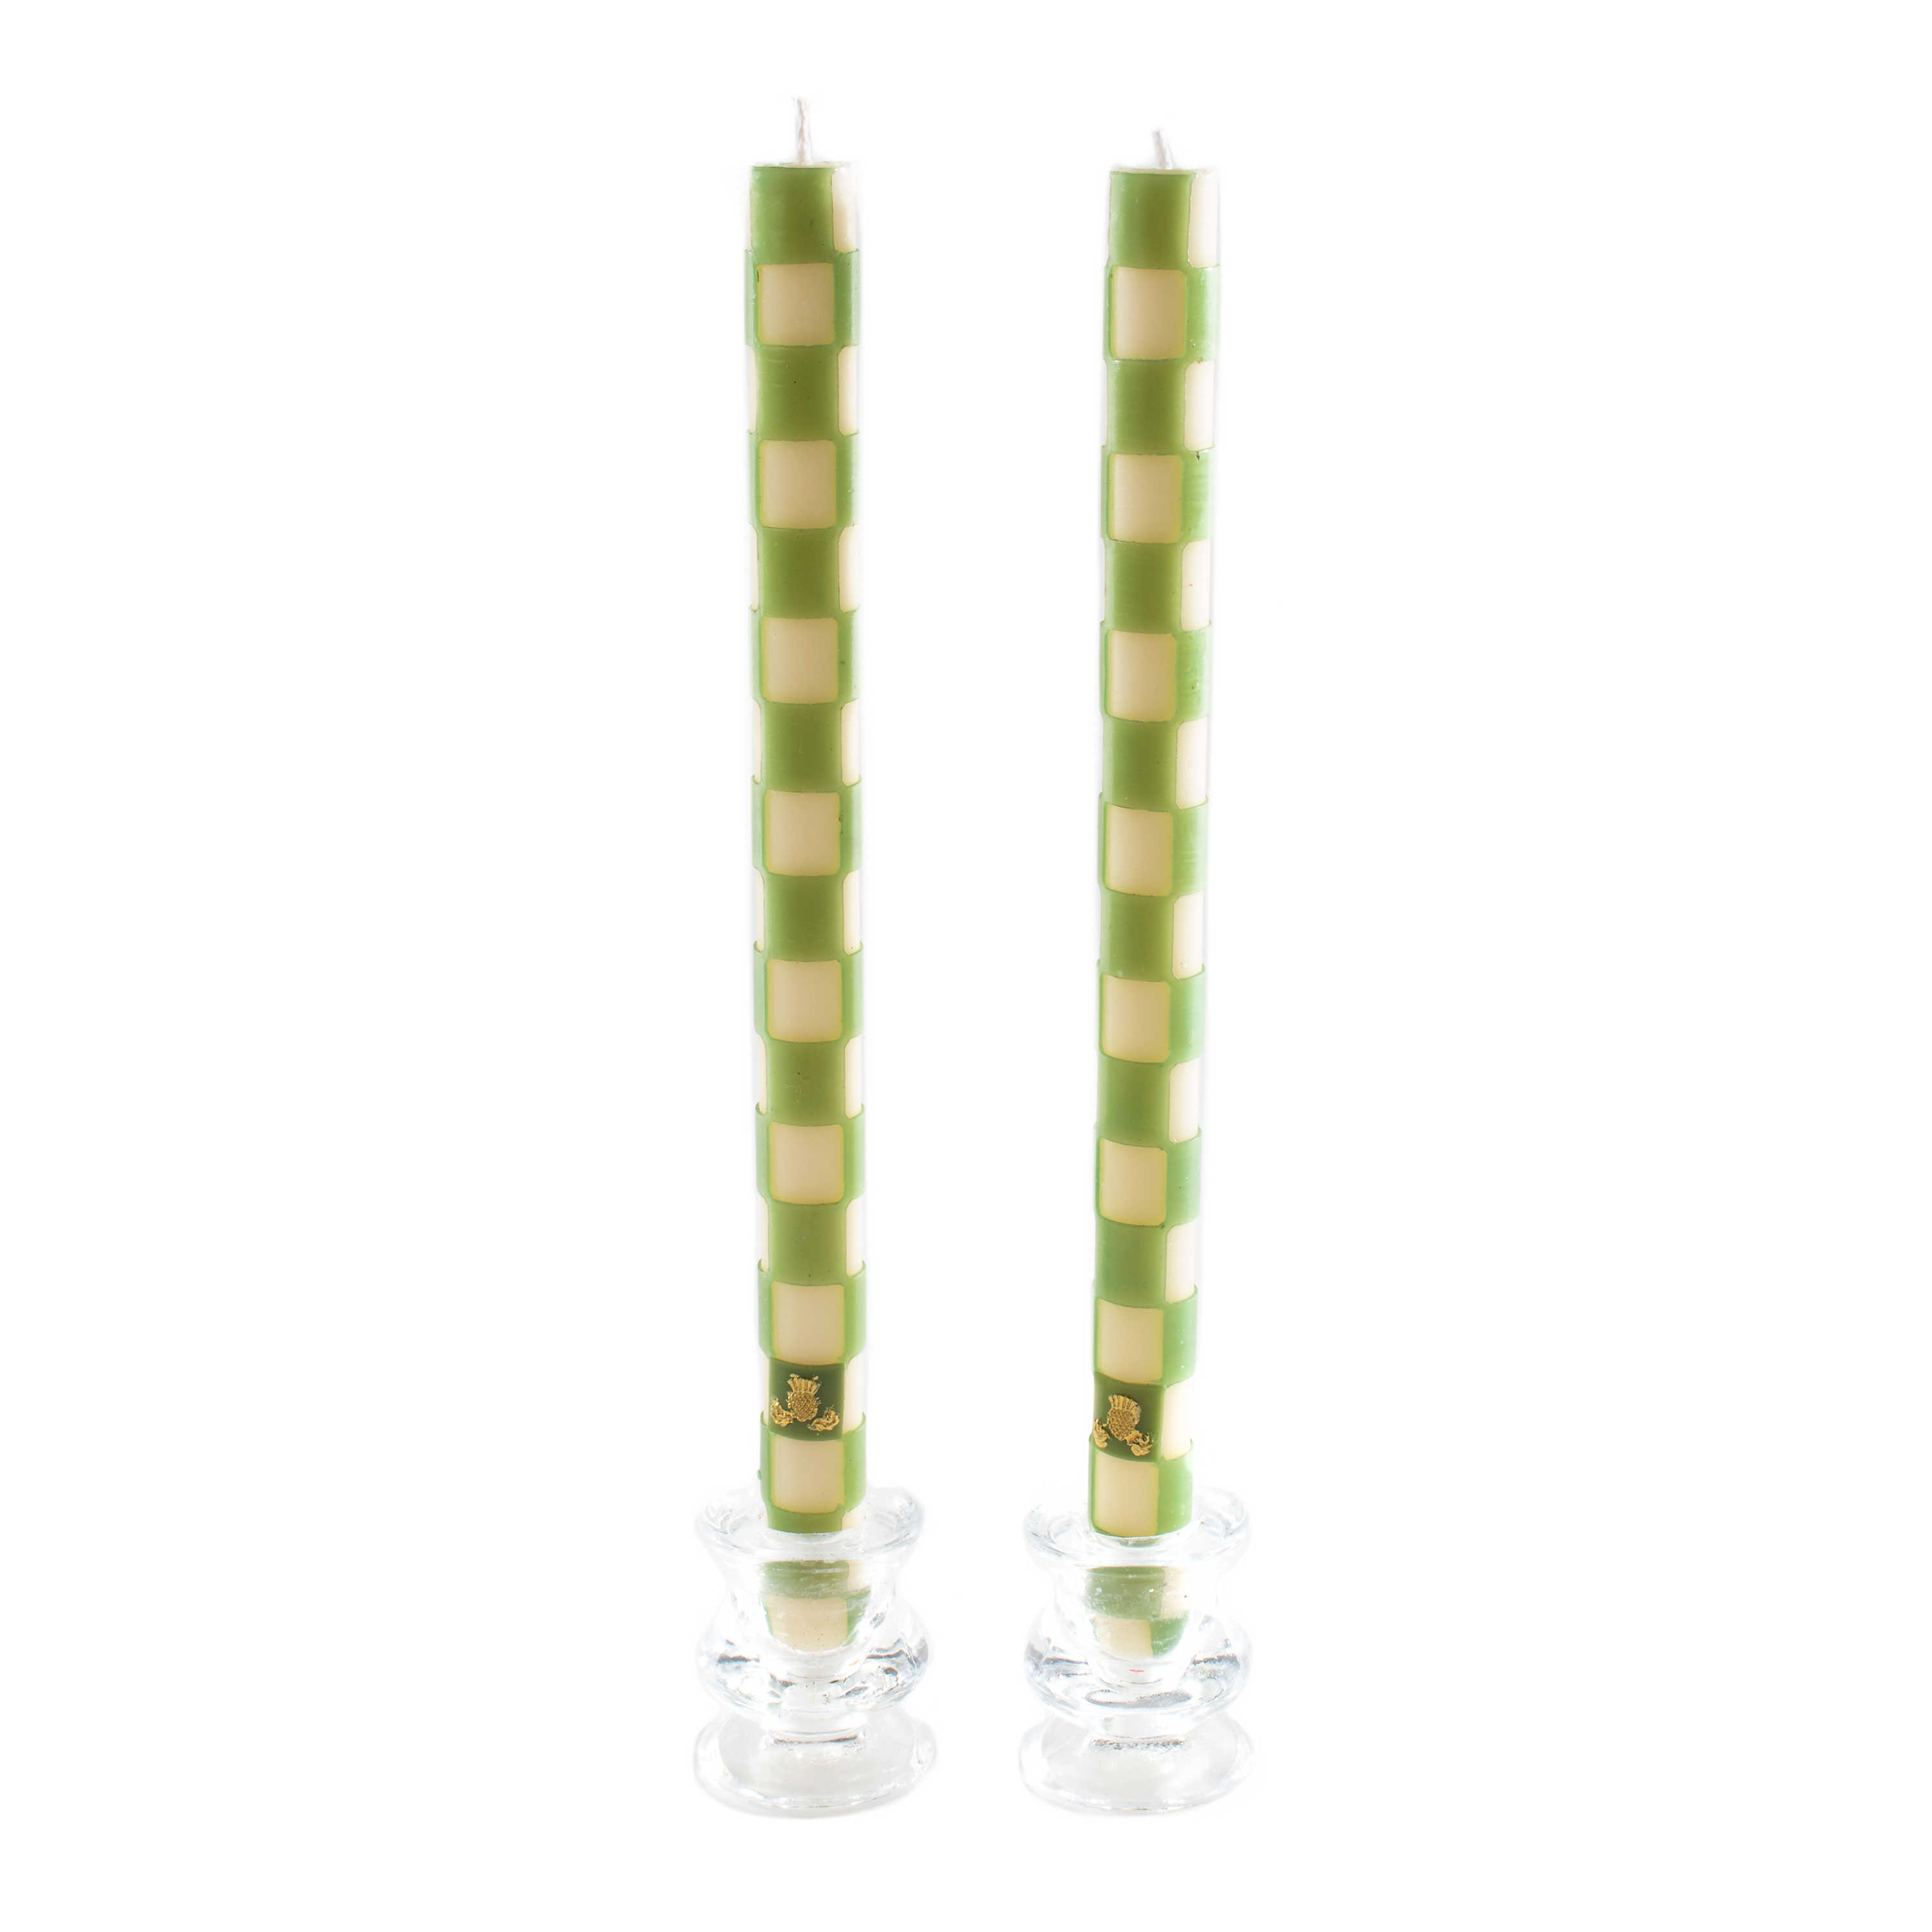 Check Dinner Candles - Green & Ivory - Set of 2 mackenzie-childs Panama 0